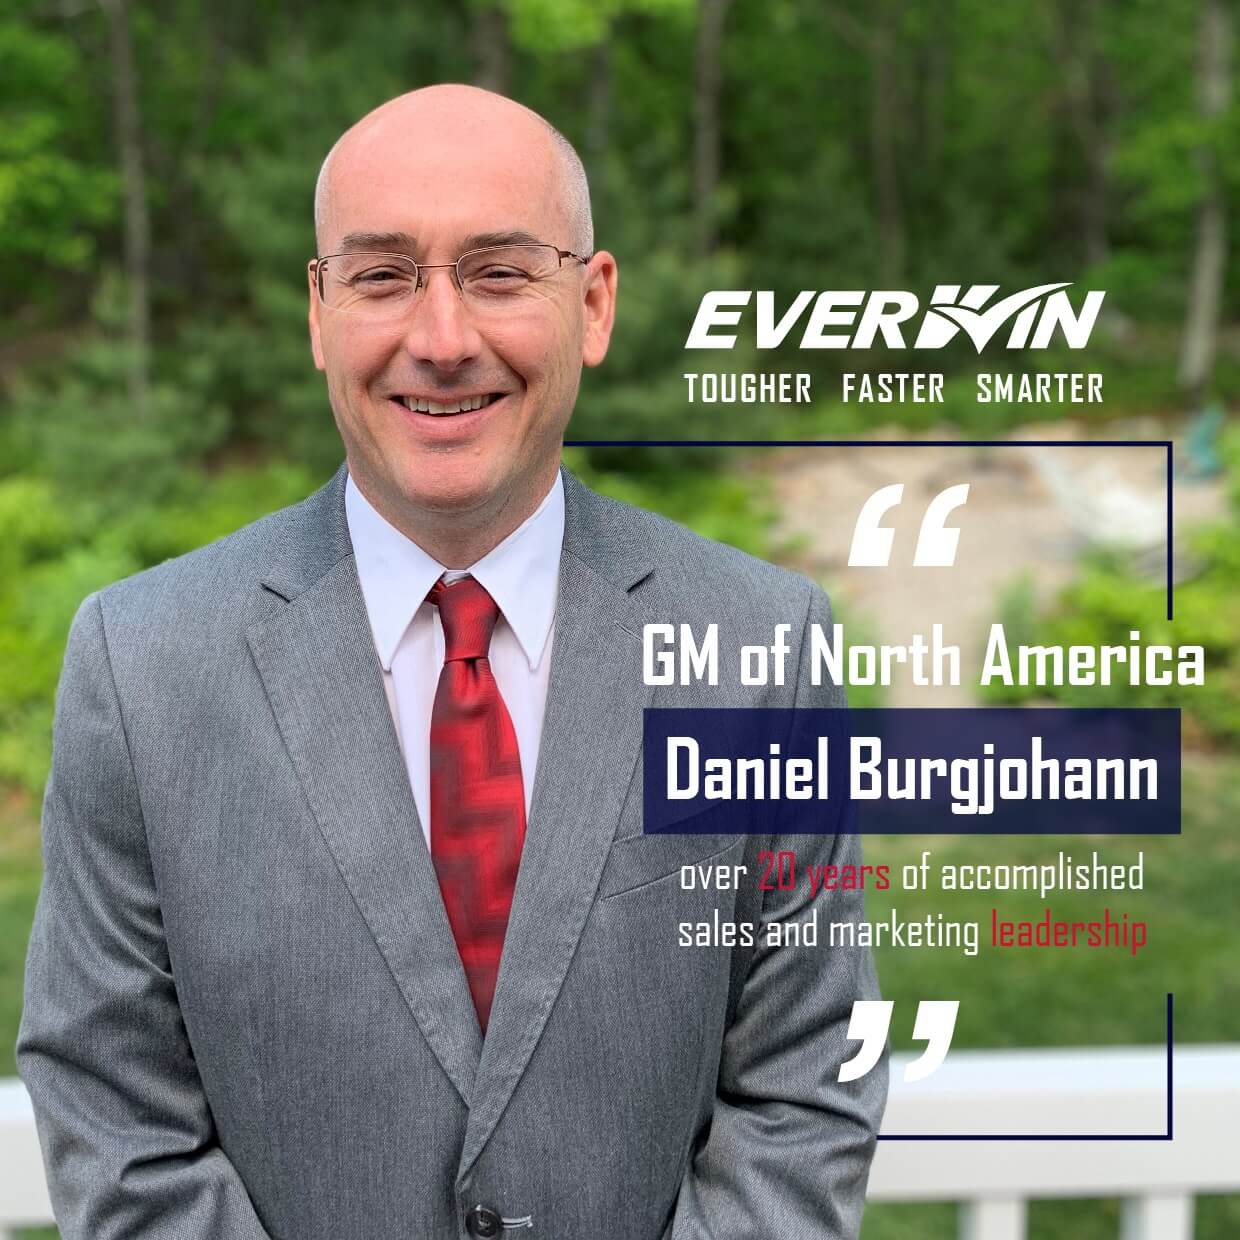 Daniel Burgjohann named General Manager of EVERWIN North America